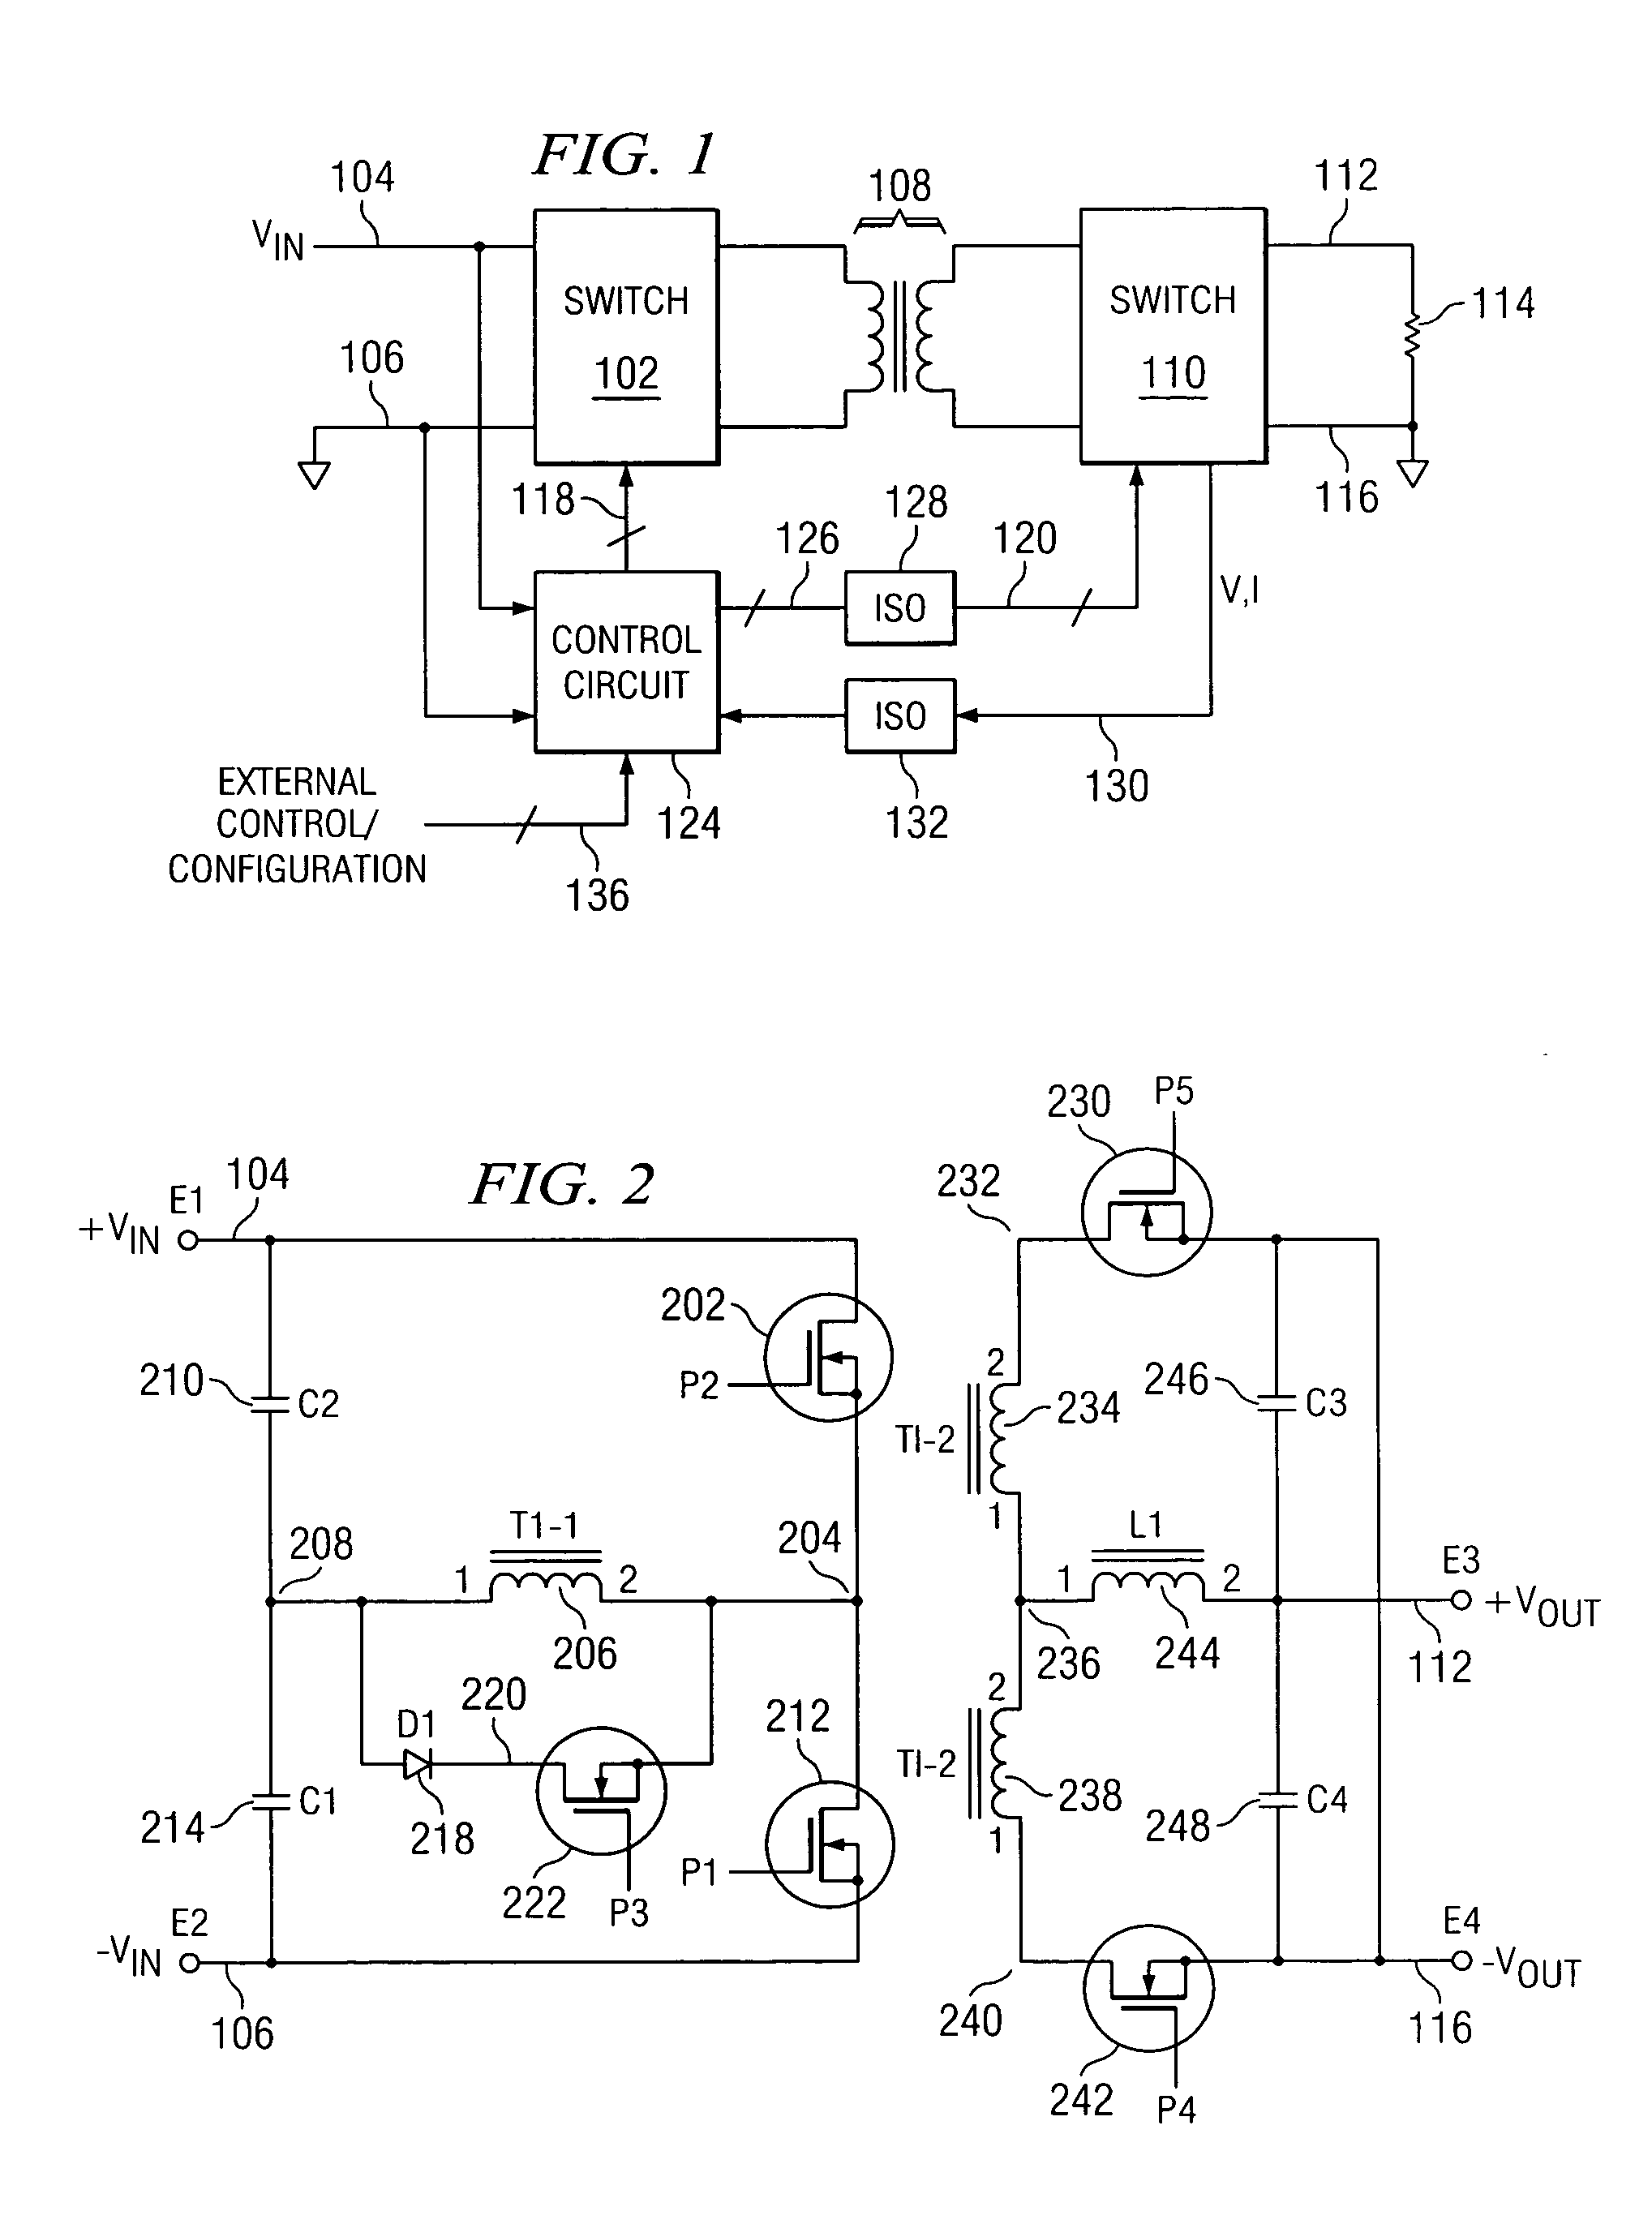 Low power PLL for PWM switching digital control power supply